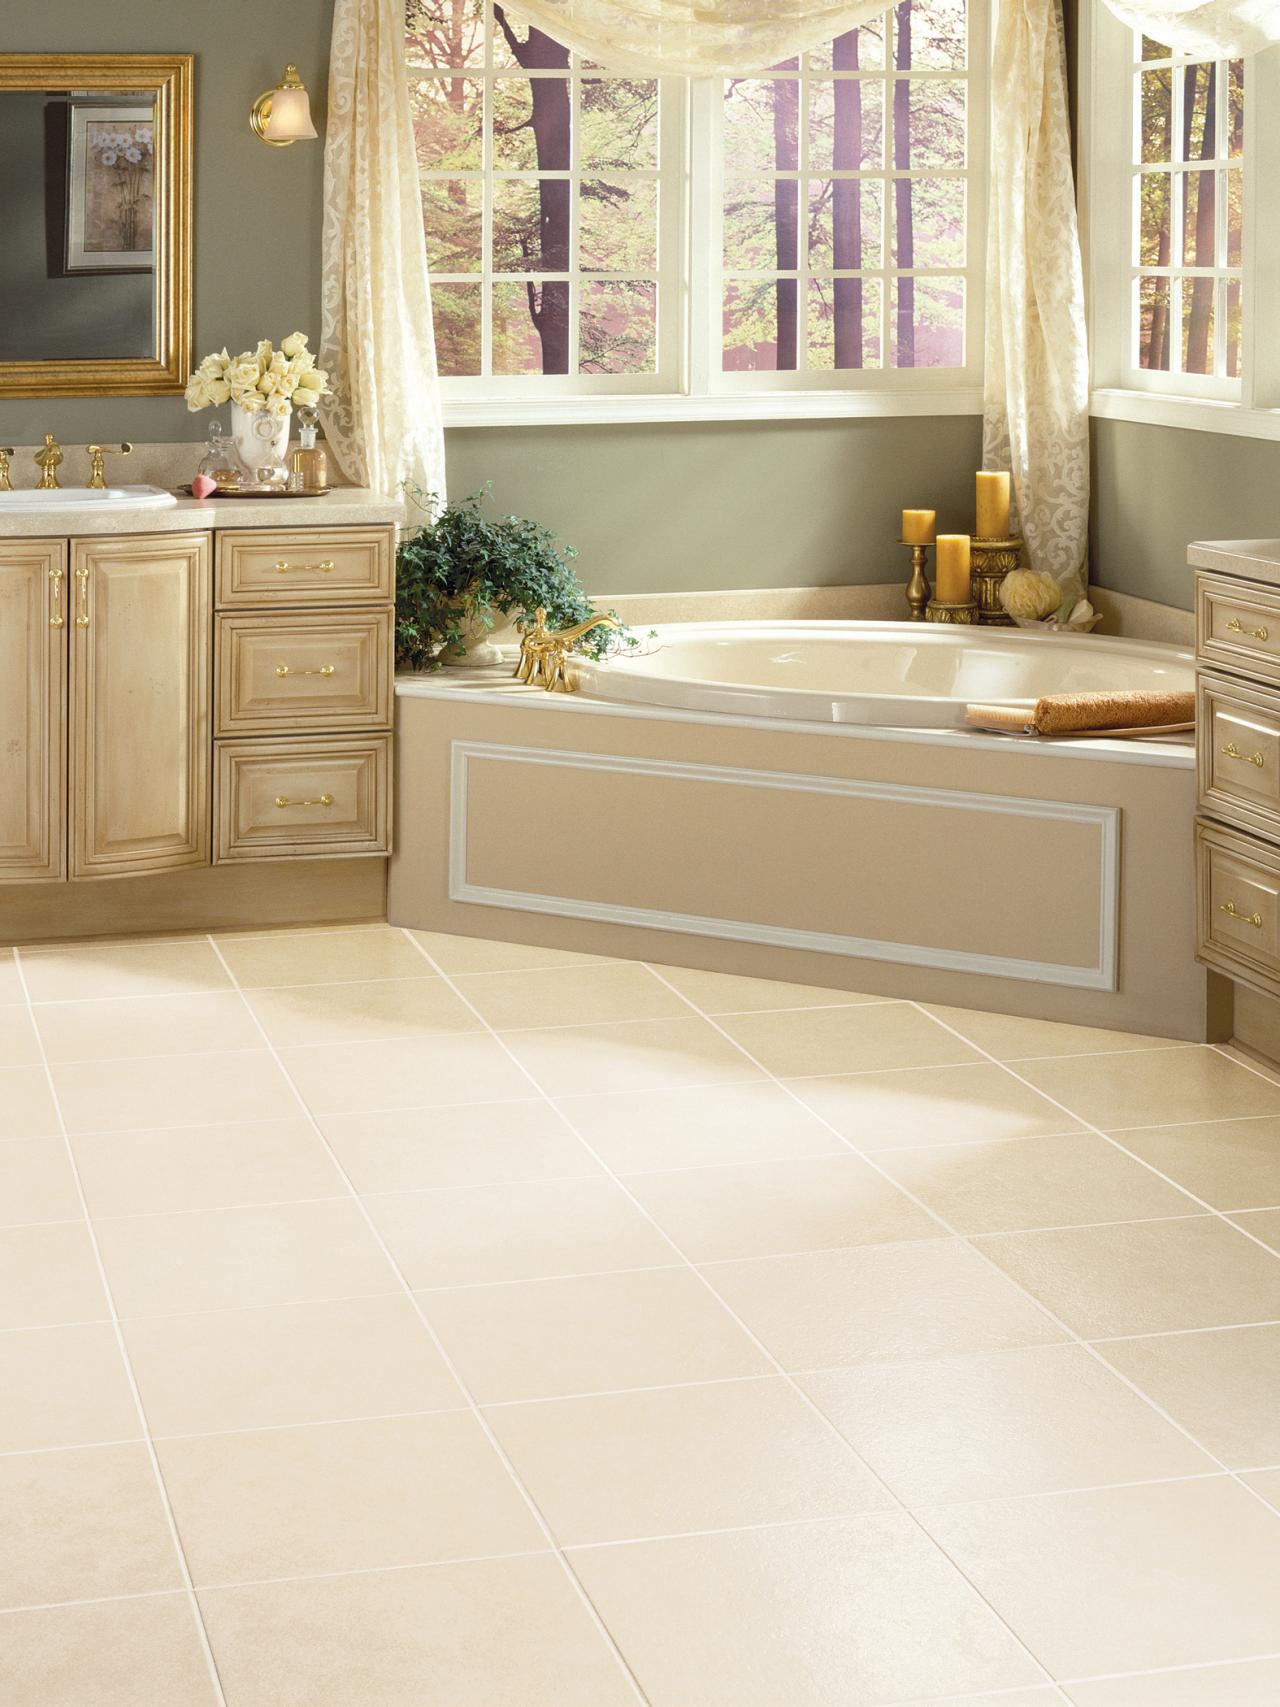 30 stunning pictures and ideas of vinyl flooring bathroom